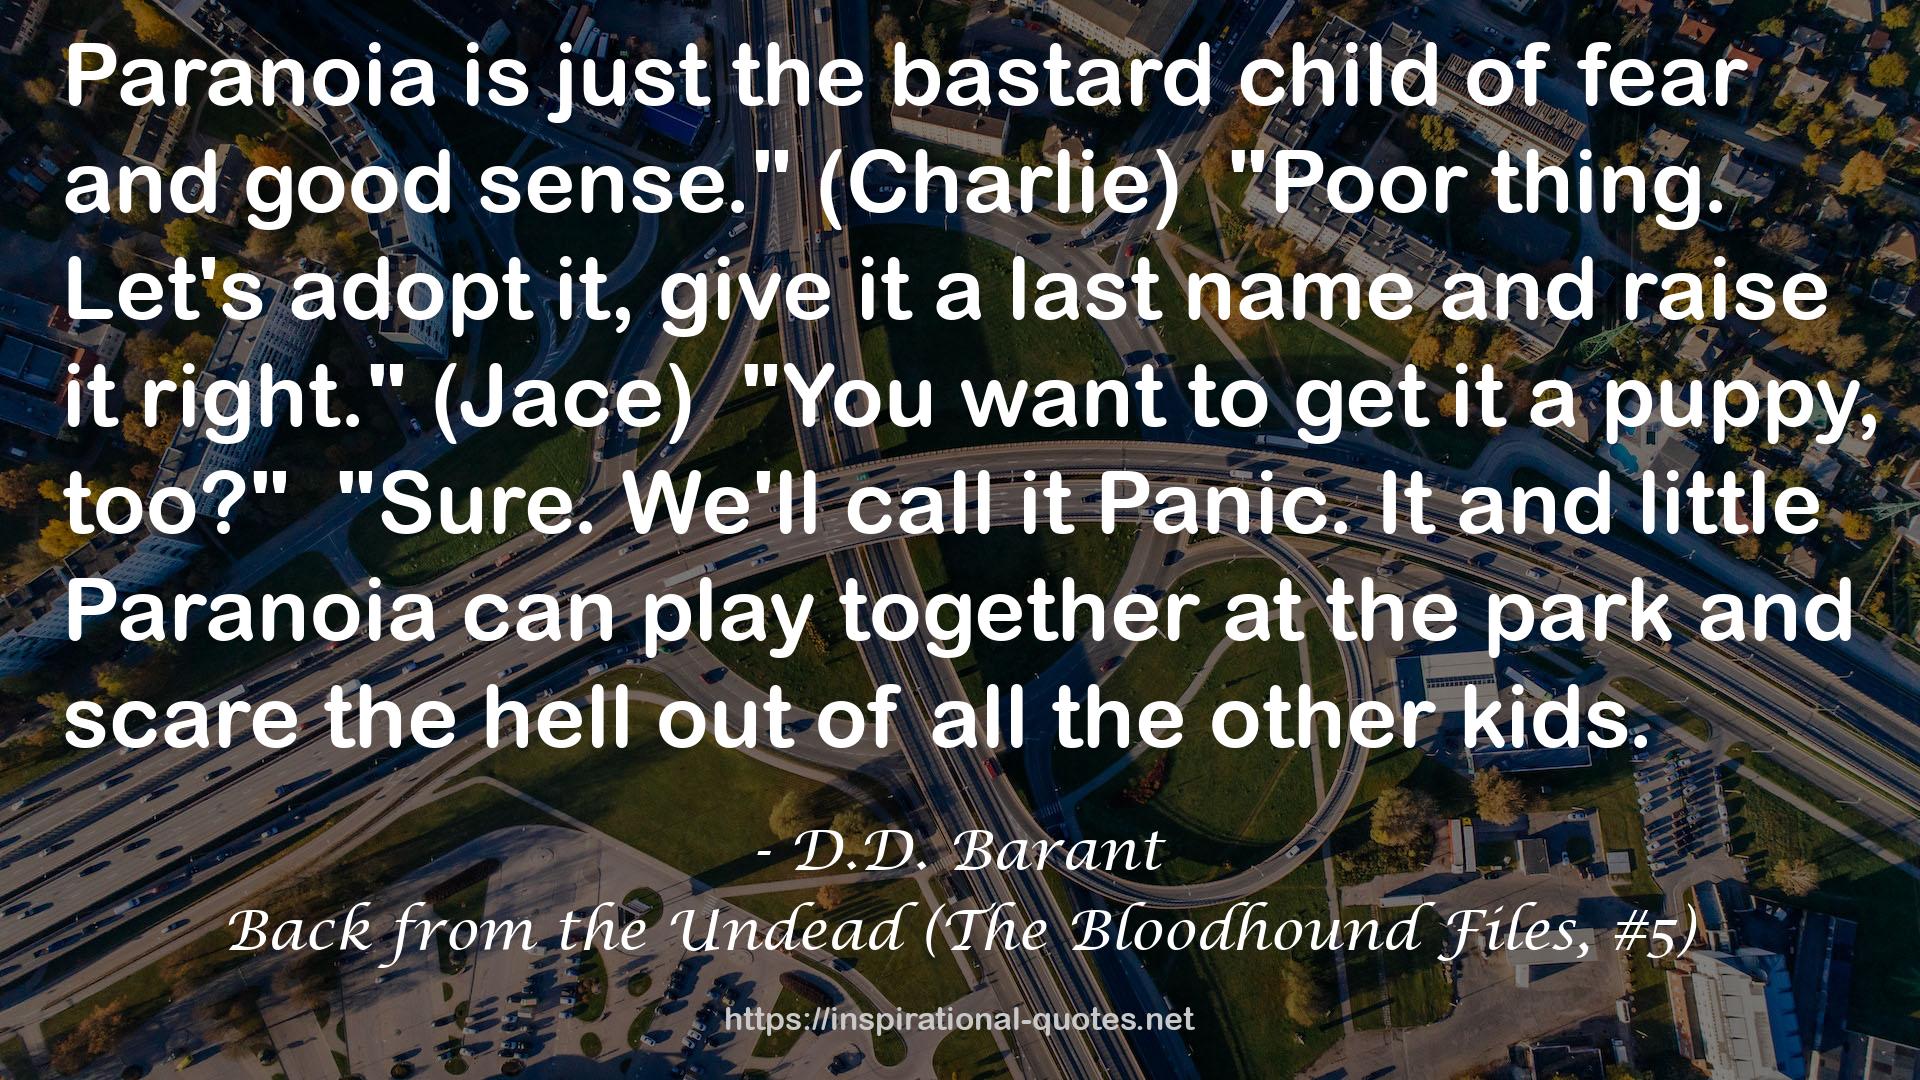 Back from the Undead (The Bloodhound Files, #5) QUOTES